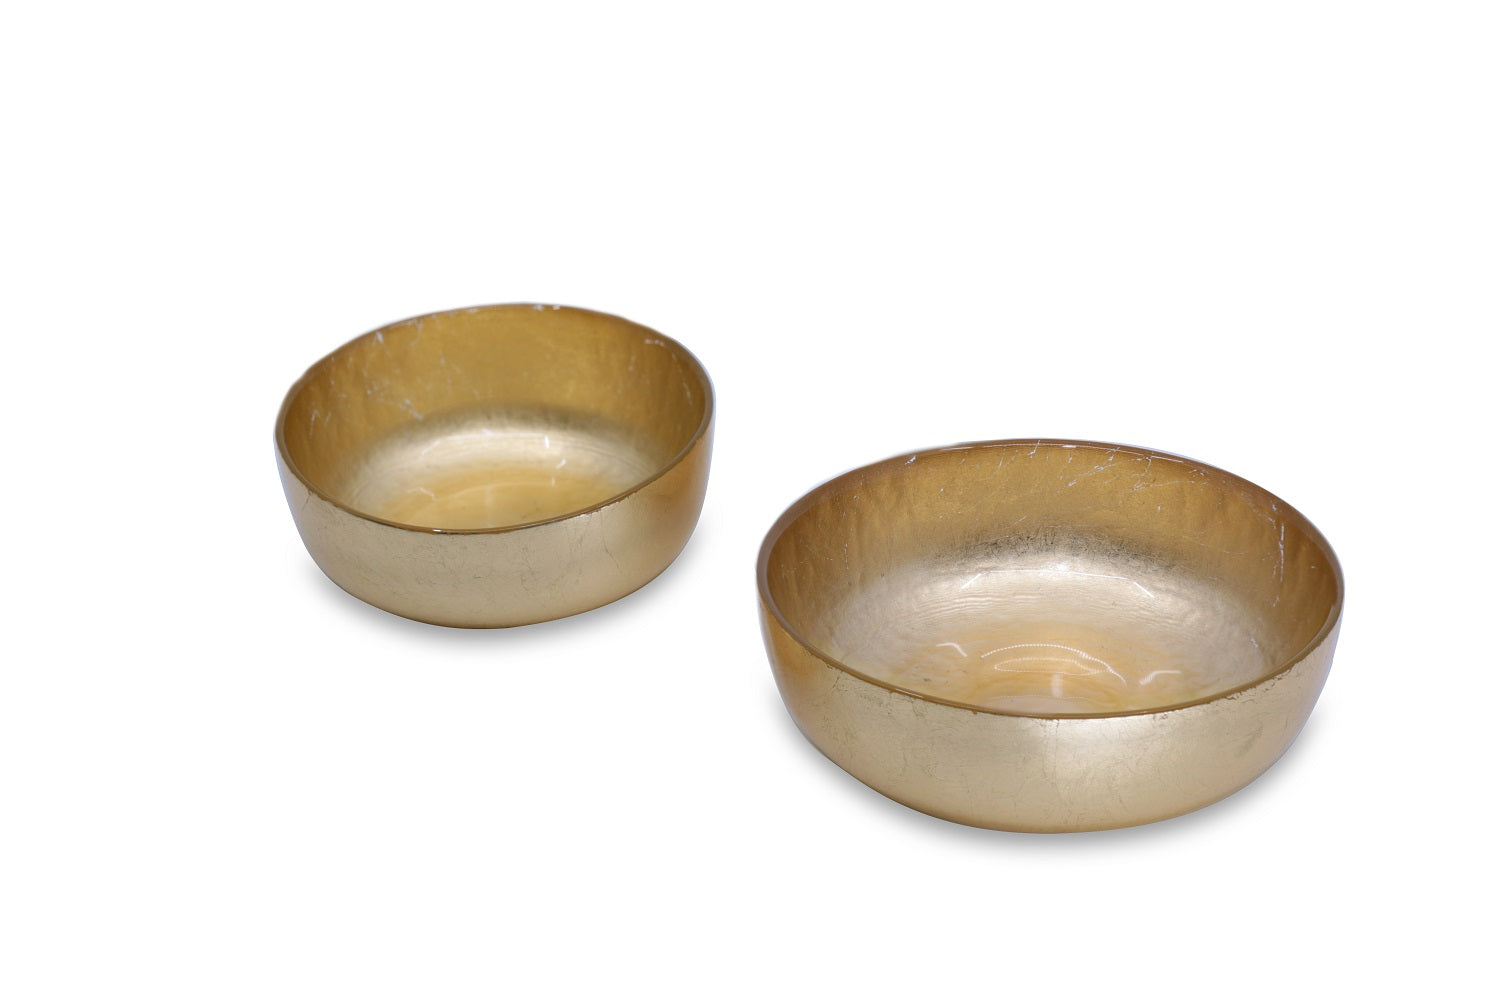 GLASS New Orleans Shallow Round Foil Leafing Bowl Set of 2  (Gold)